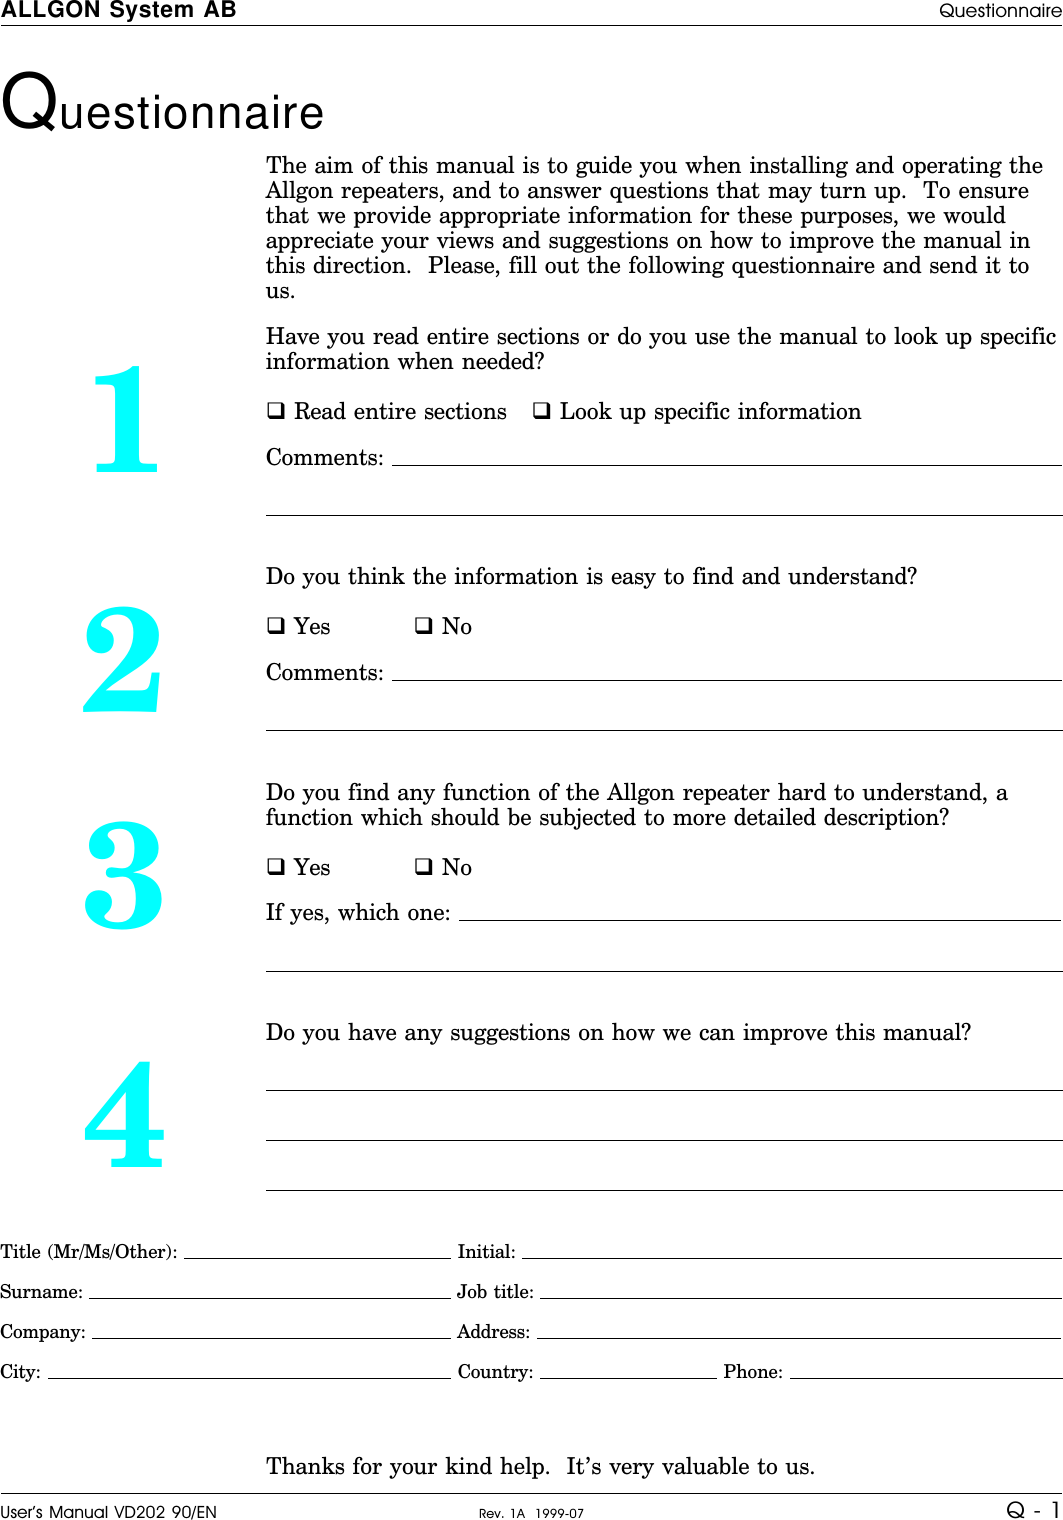 Questionnaire The aim of this manual is to guide you when installing and operating theAllgon repeaters, and to answer questions that may turn up.  To ensurethat we provide appropriate information for these purposes, we wouldappreciate your views and suggestions on how to improve the manual inthis direction.  Please, fill out the following questionnaire and send it tous.1Have you read entire sections or do you use the manual to look up specificinformation when needed?q Read entire sections q Look up specific informationComments: 2Do you think the information is easy to find and understand?q Yes q NoComments: 3Do you find any function of the Allgon repeater hard to understand, afunction which should be subjected to more detailed description?q Yes q NoIf yes, which one: 4Do you have any suggestions on how we can improve this manual?Title (Mr/Ms/Other):   Initial: Surname:  Job title: Company:  Address: City:   Country:   Phone: Thanks for your kind help.  It’s very valuable to us.ALLGON System AB QuestionnaireUser’s Manual VD202 90/EN Rev. 1A  1999-07 Q - 1